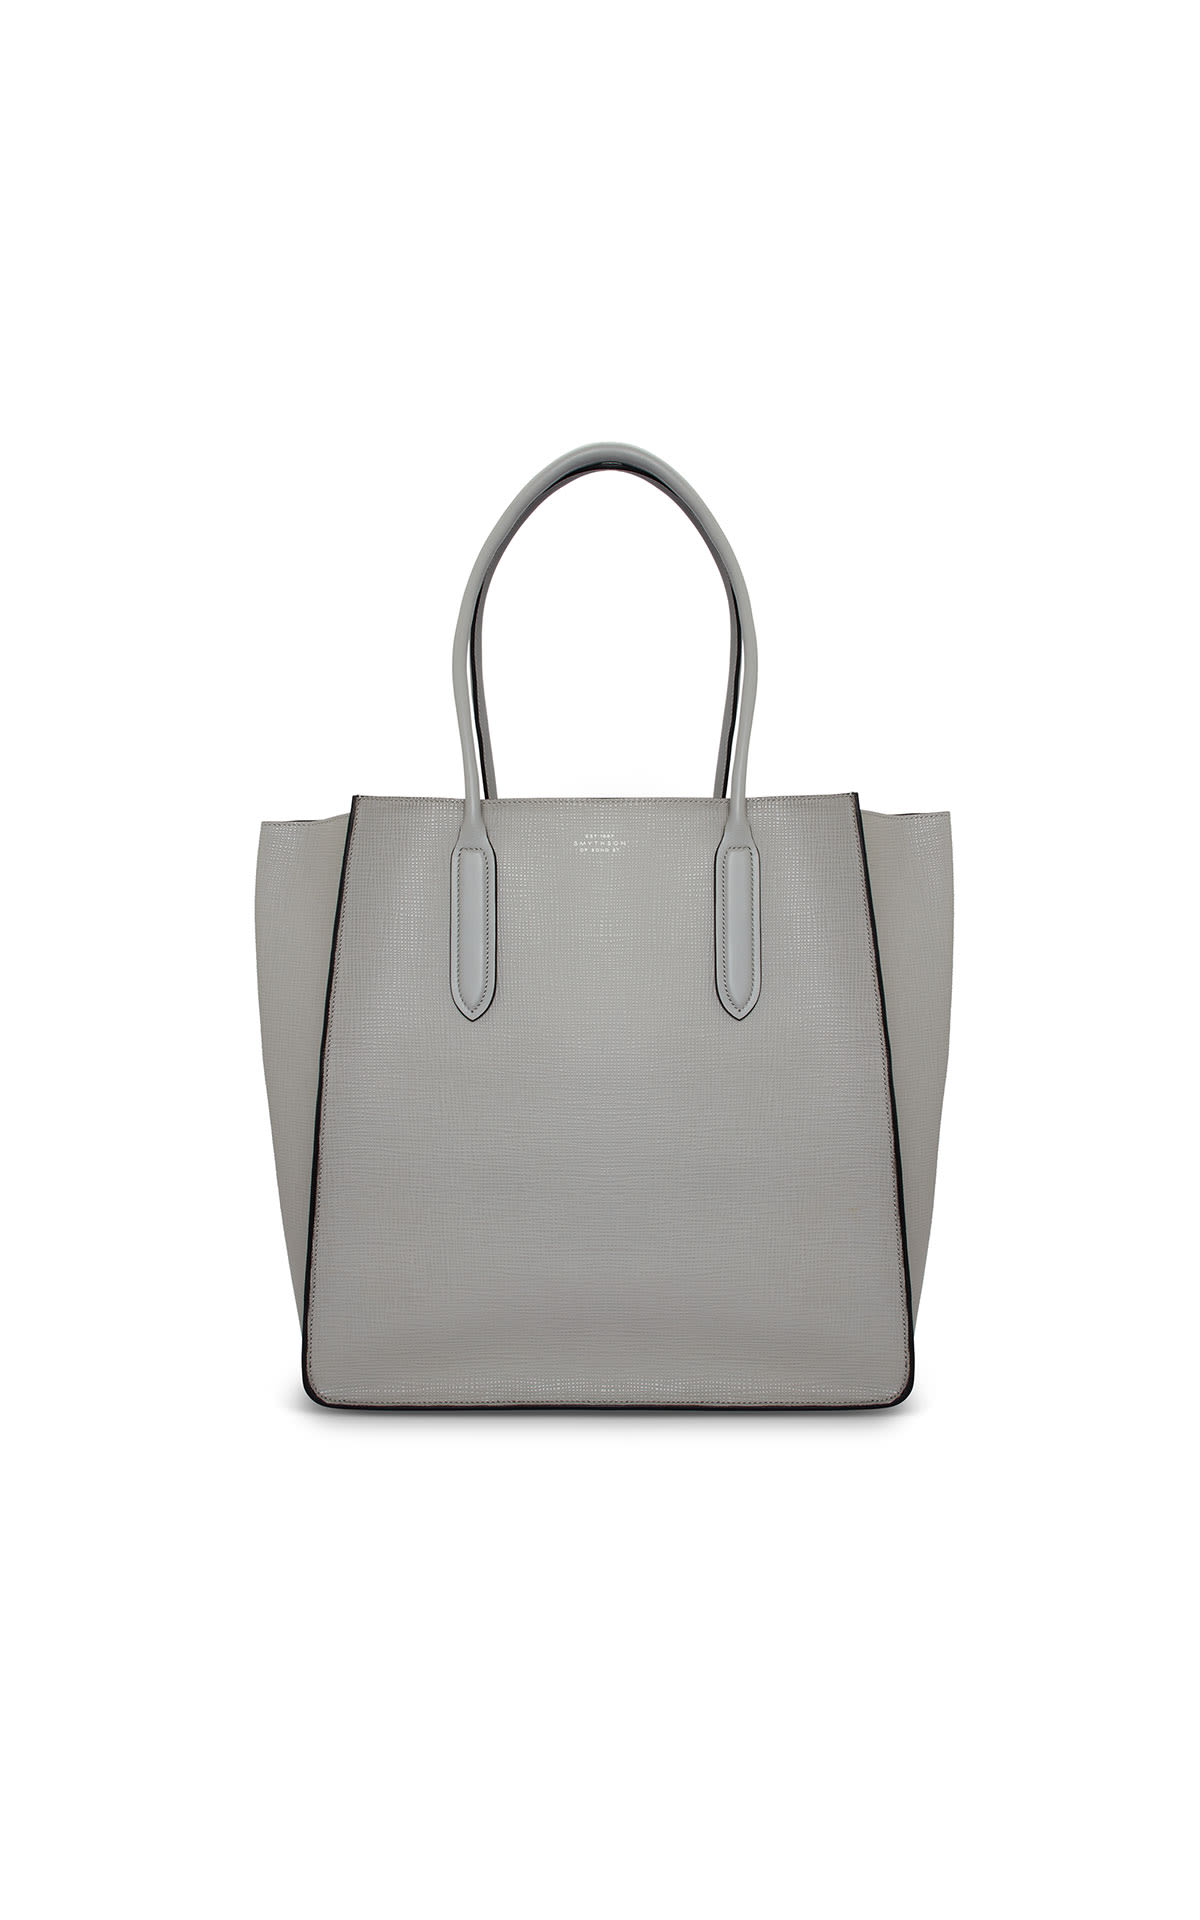 Smythson Panama snap tote from Bicester Village